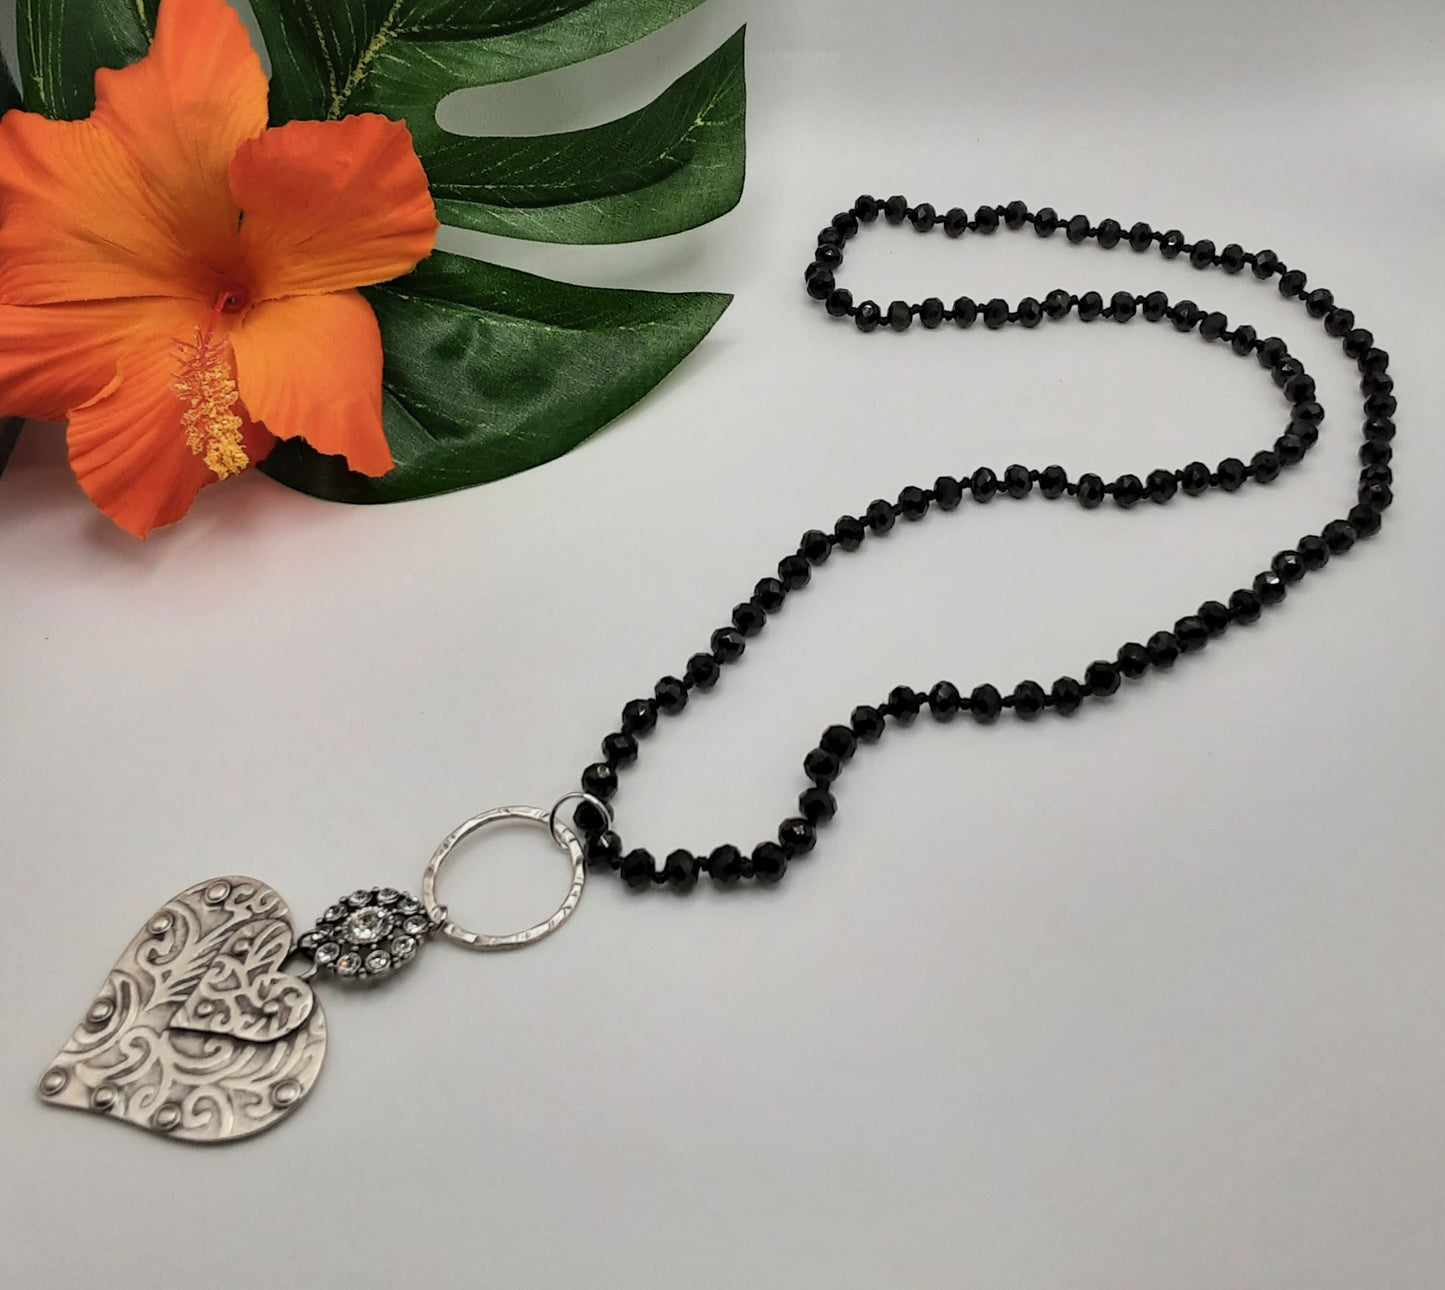 A Silver Heart Black Crystal Bead Handmade Necklace adorned with crystal beads and featuring a heart-shaped pendant, made by BFF CREATIONS.